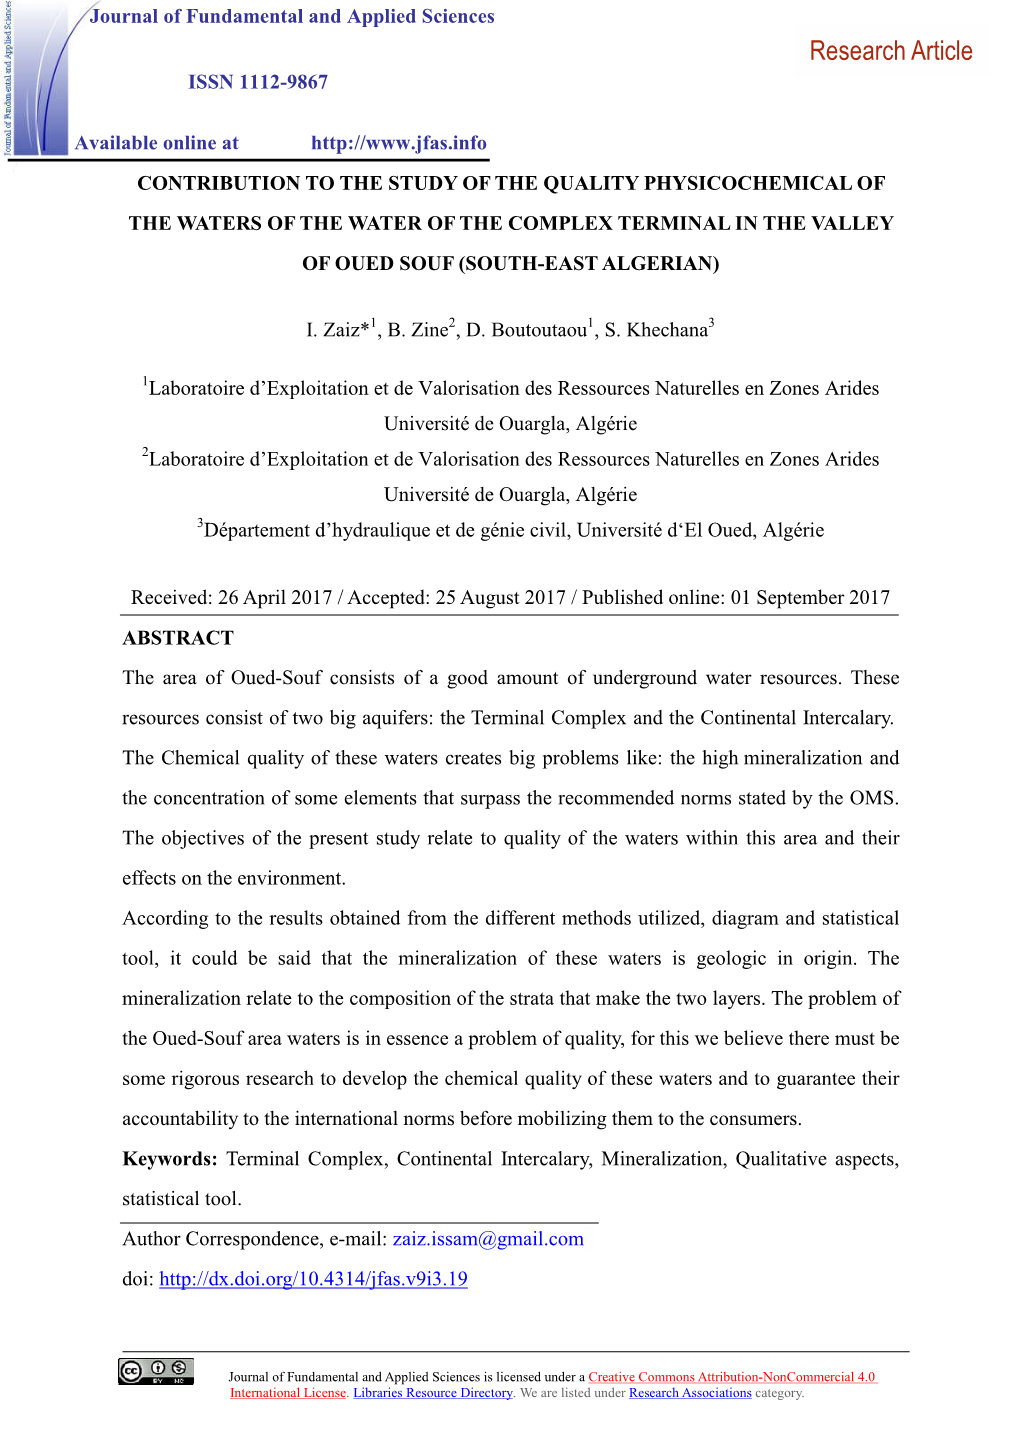 Contribution to the Study of the Quality Physicochemical of the Waters of the Water of the Complex Terminal in the Valley of Oued Souf (South-East Algerian)